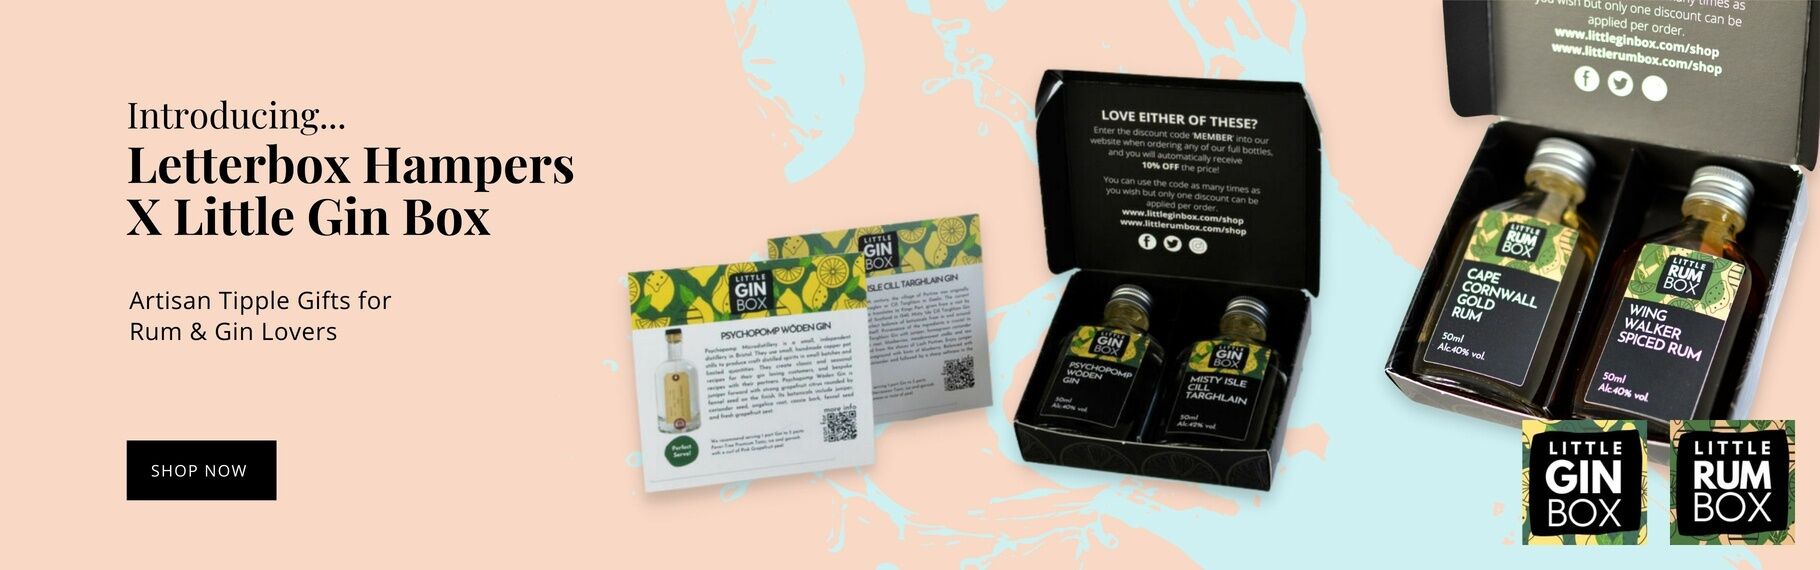 Introducing Letterbox Hampers X Little Gin Box